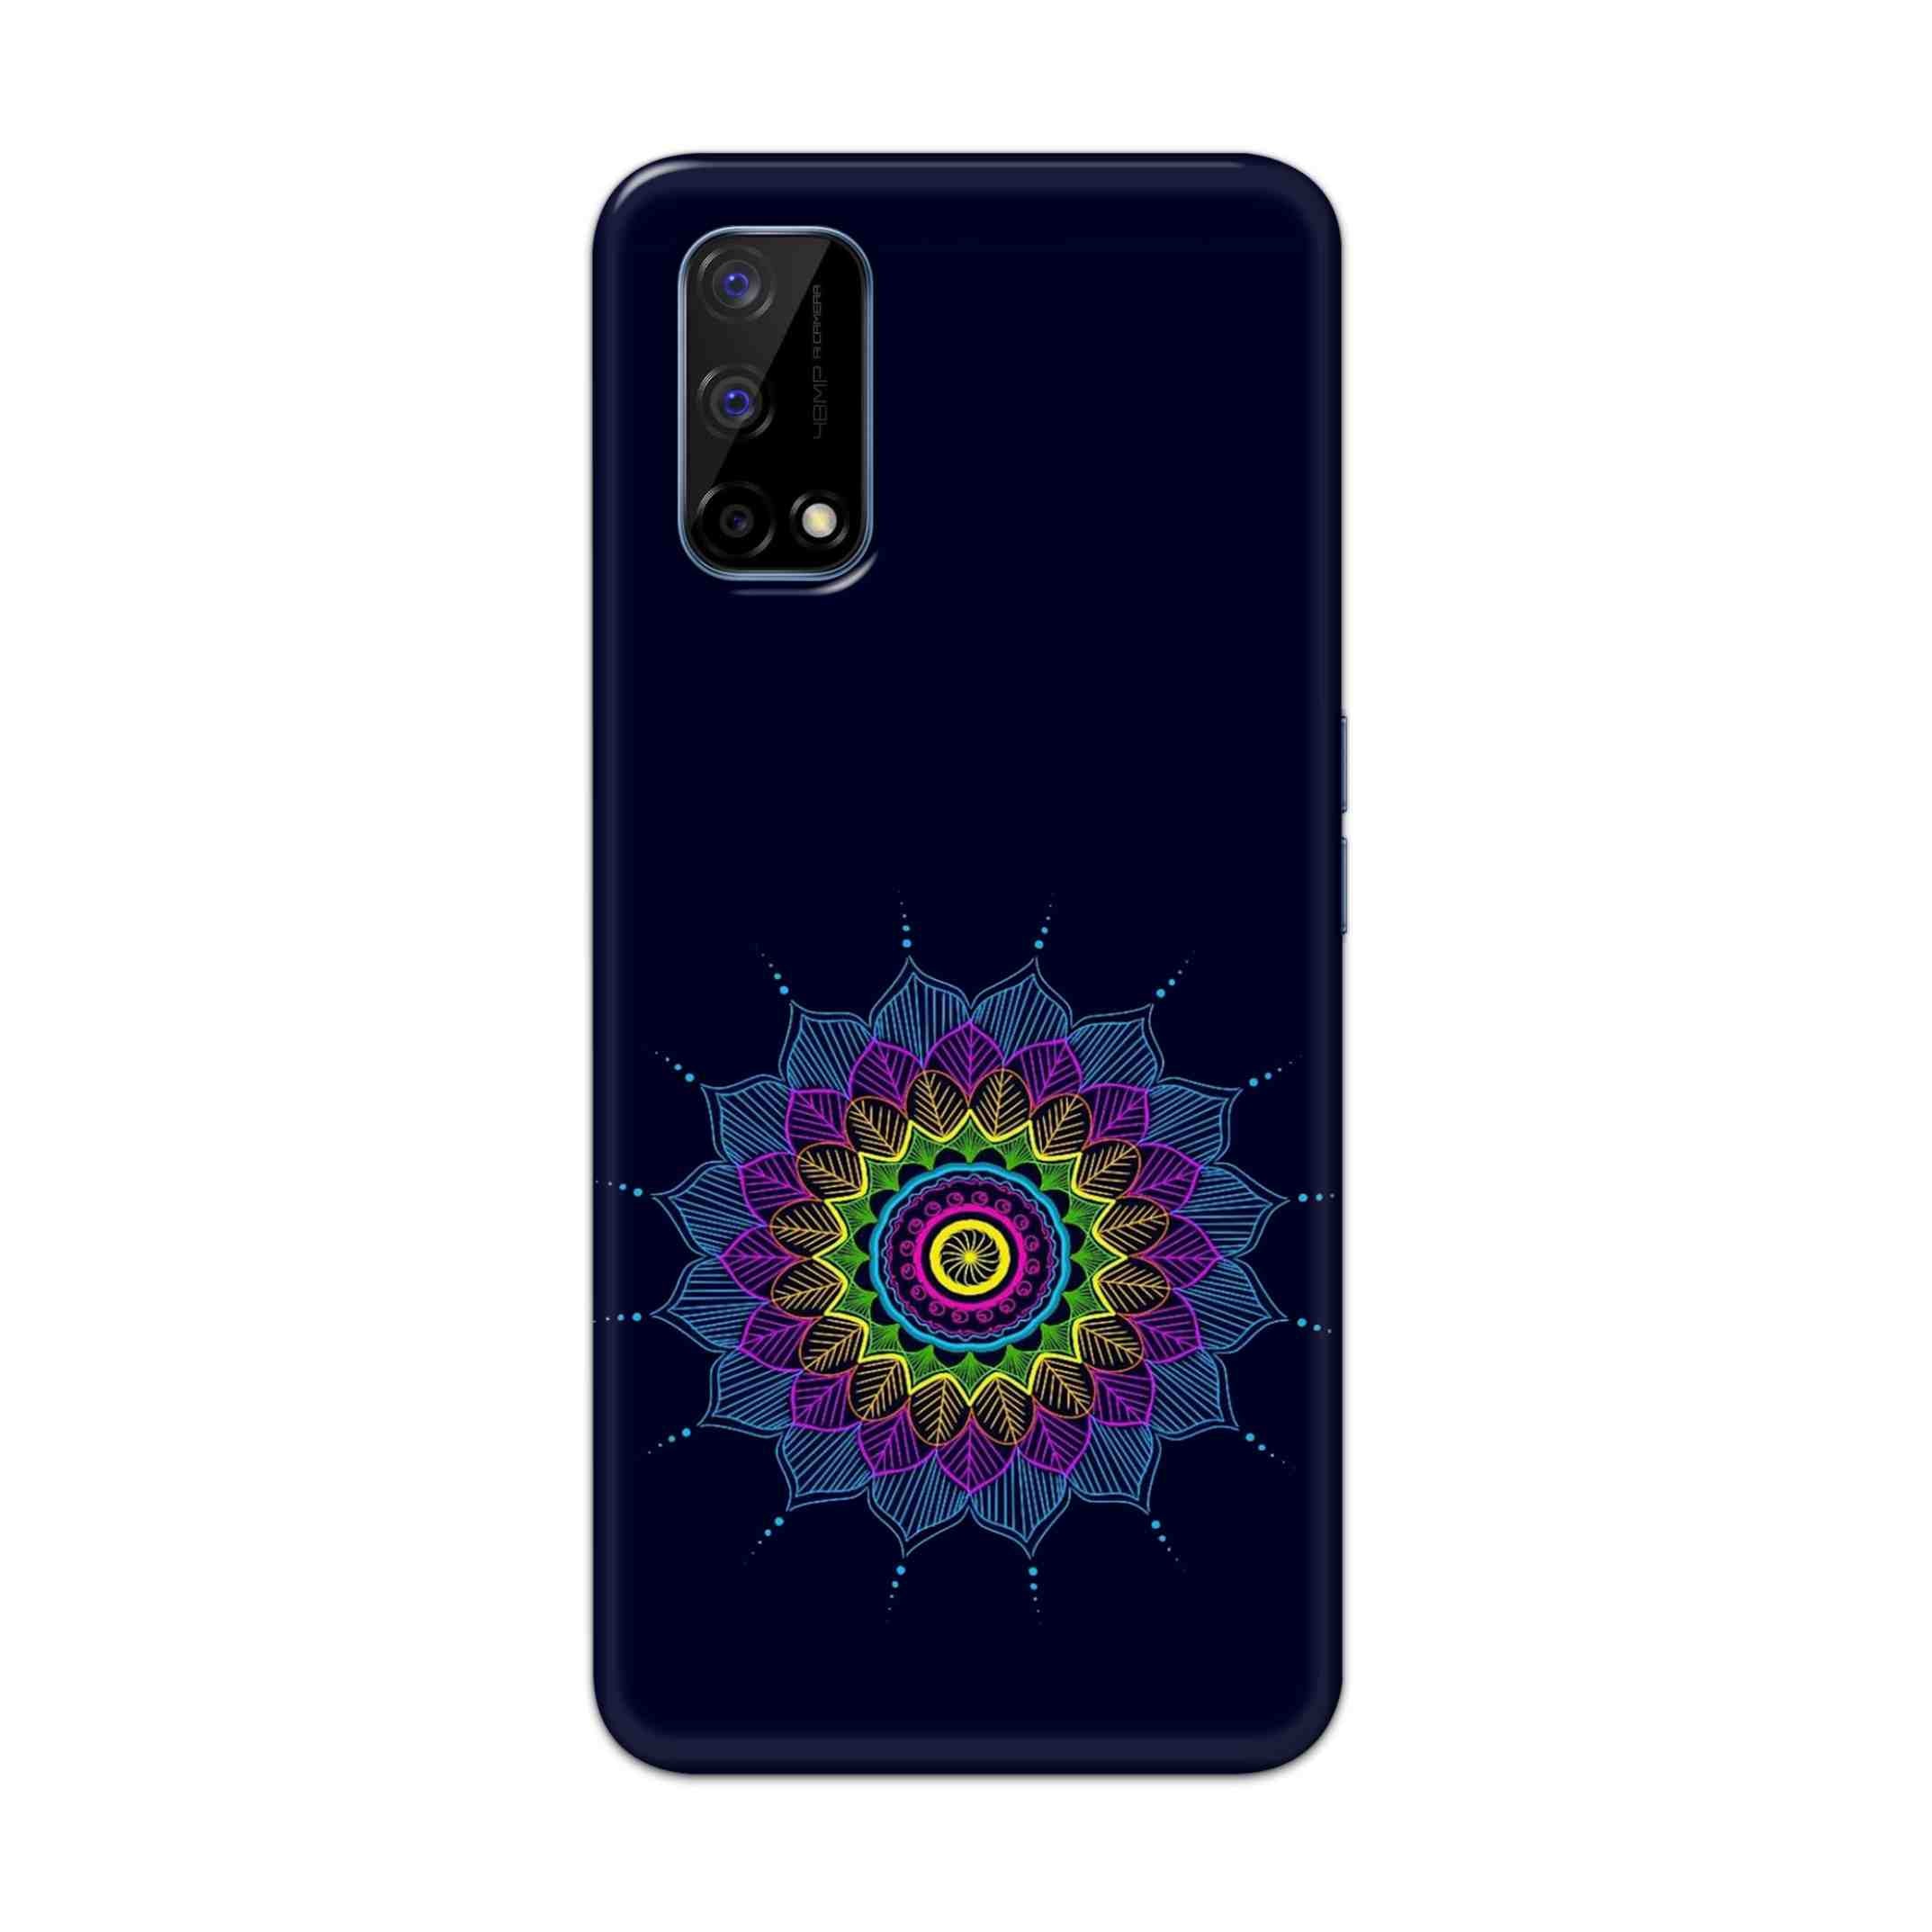 Buy Jung And Mandalas Hard Back Mobile Phone Case Cover For Realme Narzo 30 Pro Online